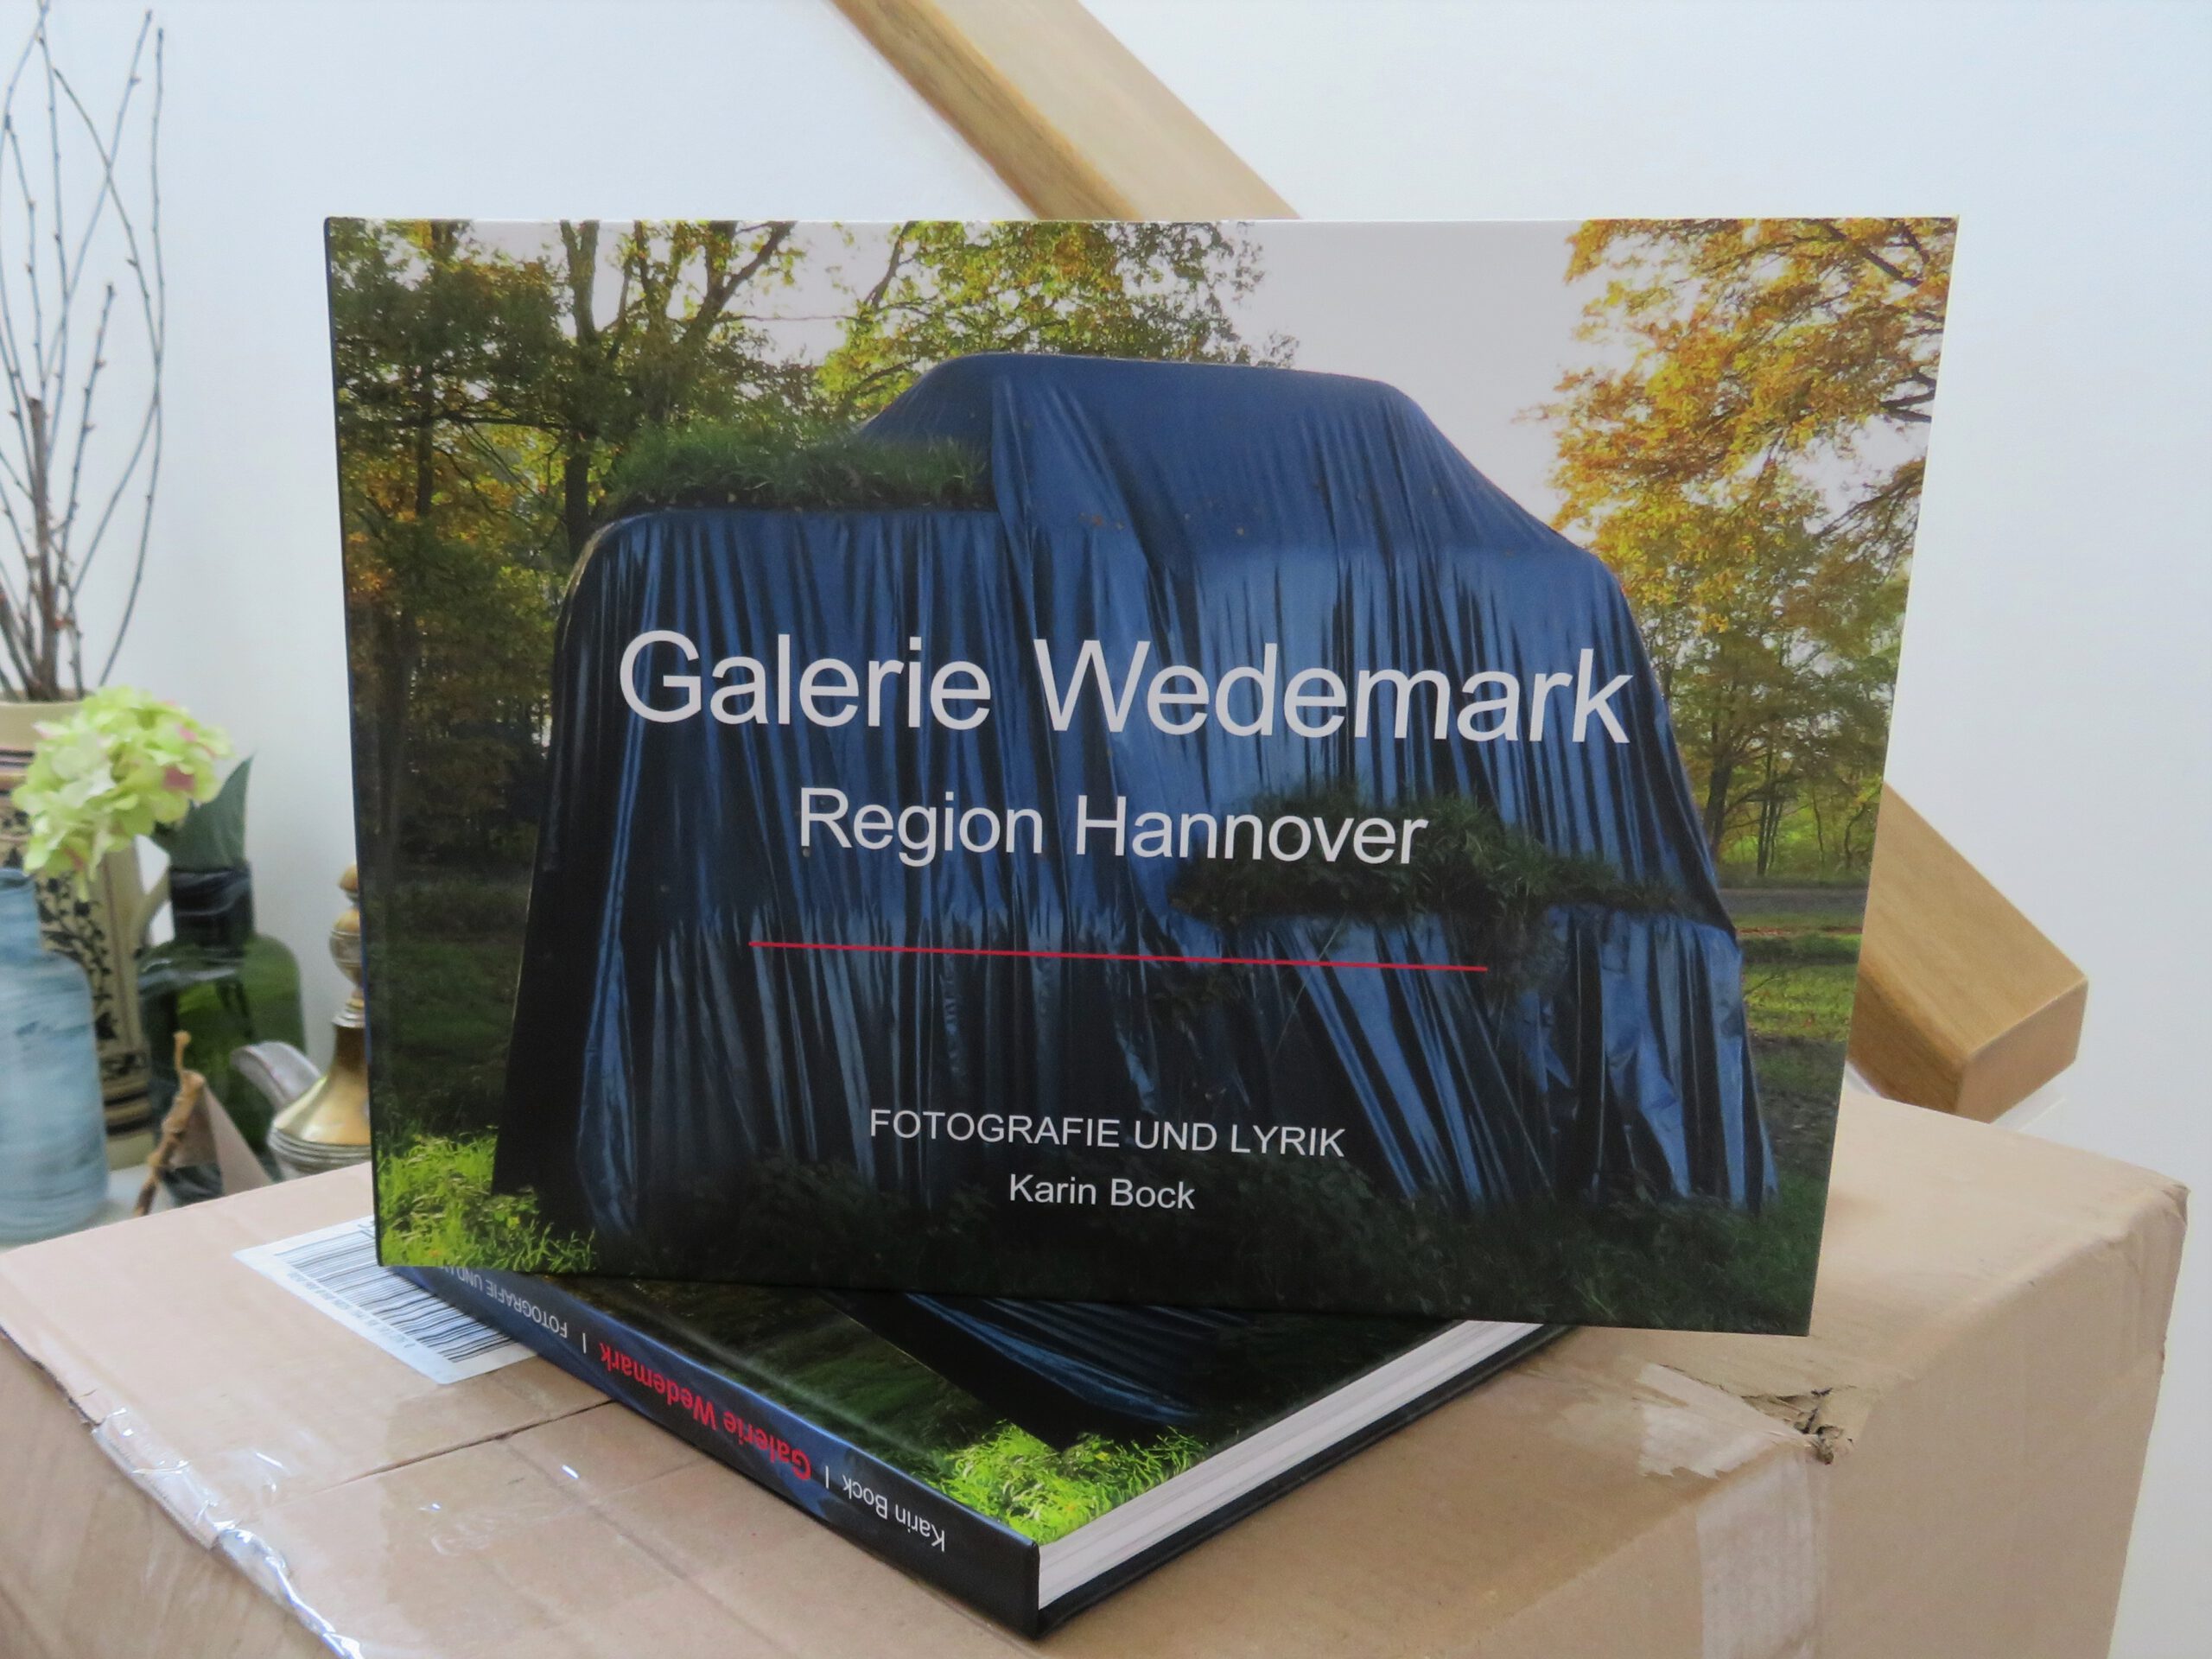 You are currently viewing “Galerie Wedemark”